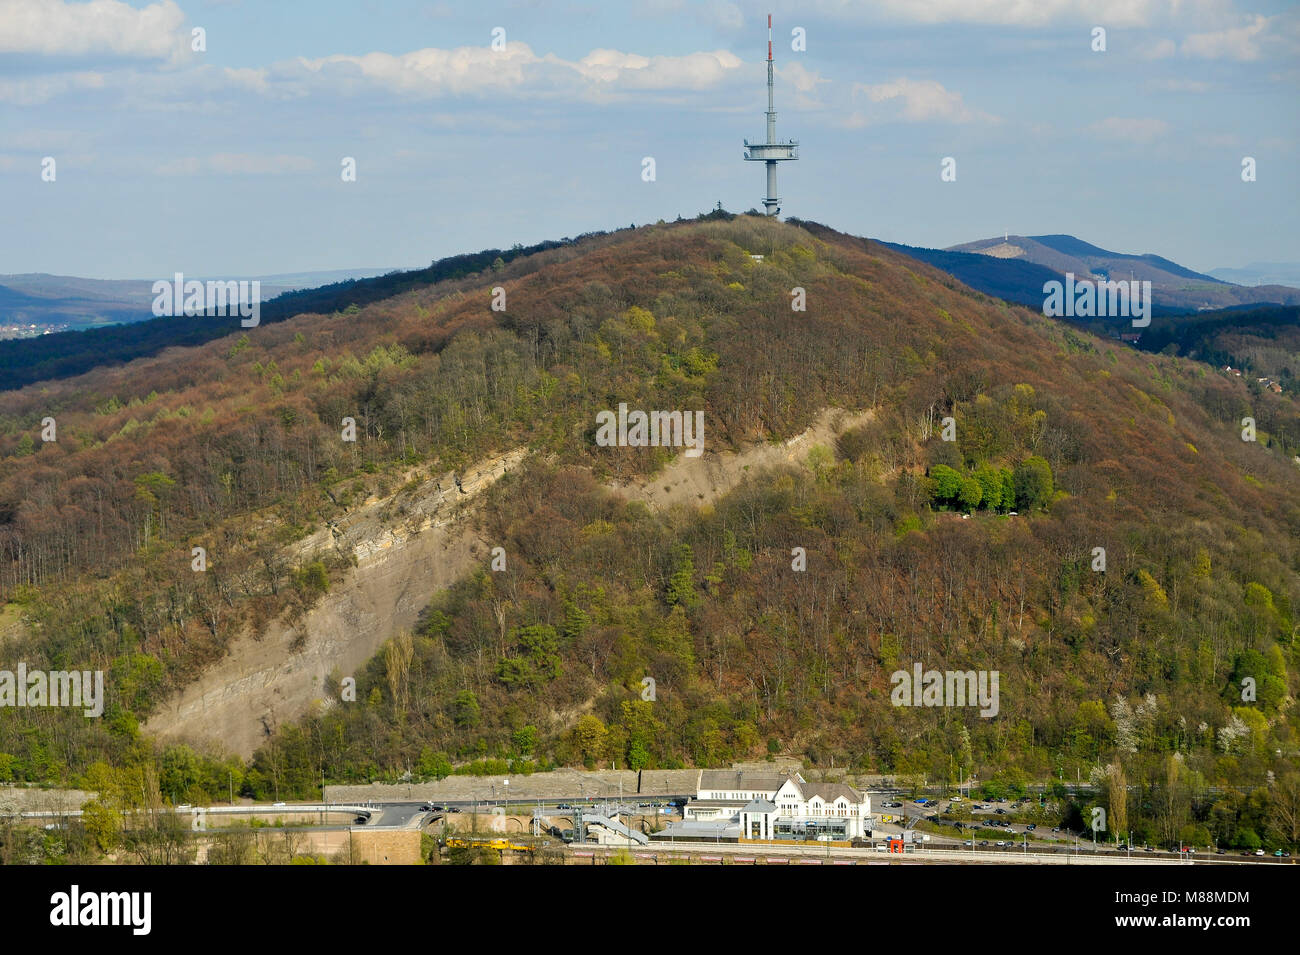 Two secret Nazi German underground structures inside and 142 m Jakobsberg Telecommunication Tower on the top of Jakobsberg in Wesergebirge (Weser Hill Stock Photo